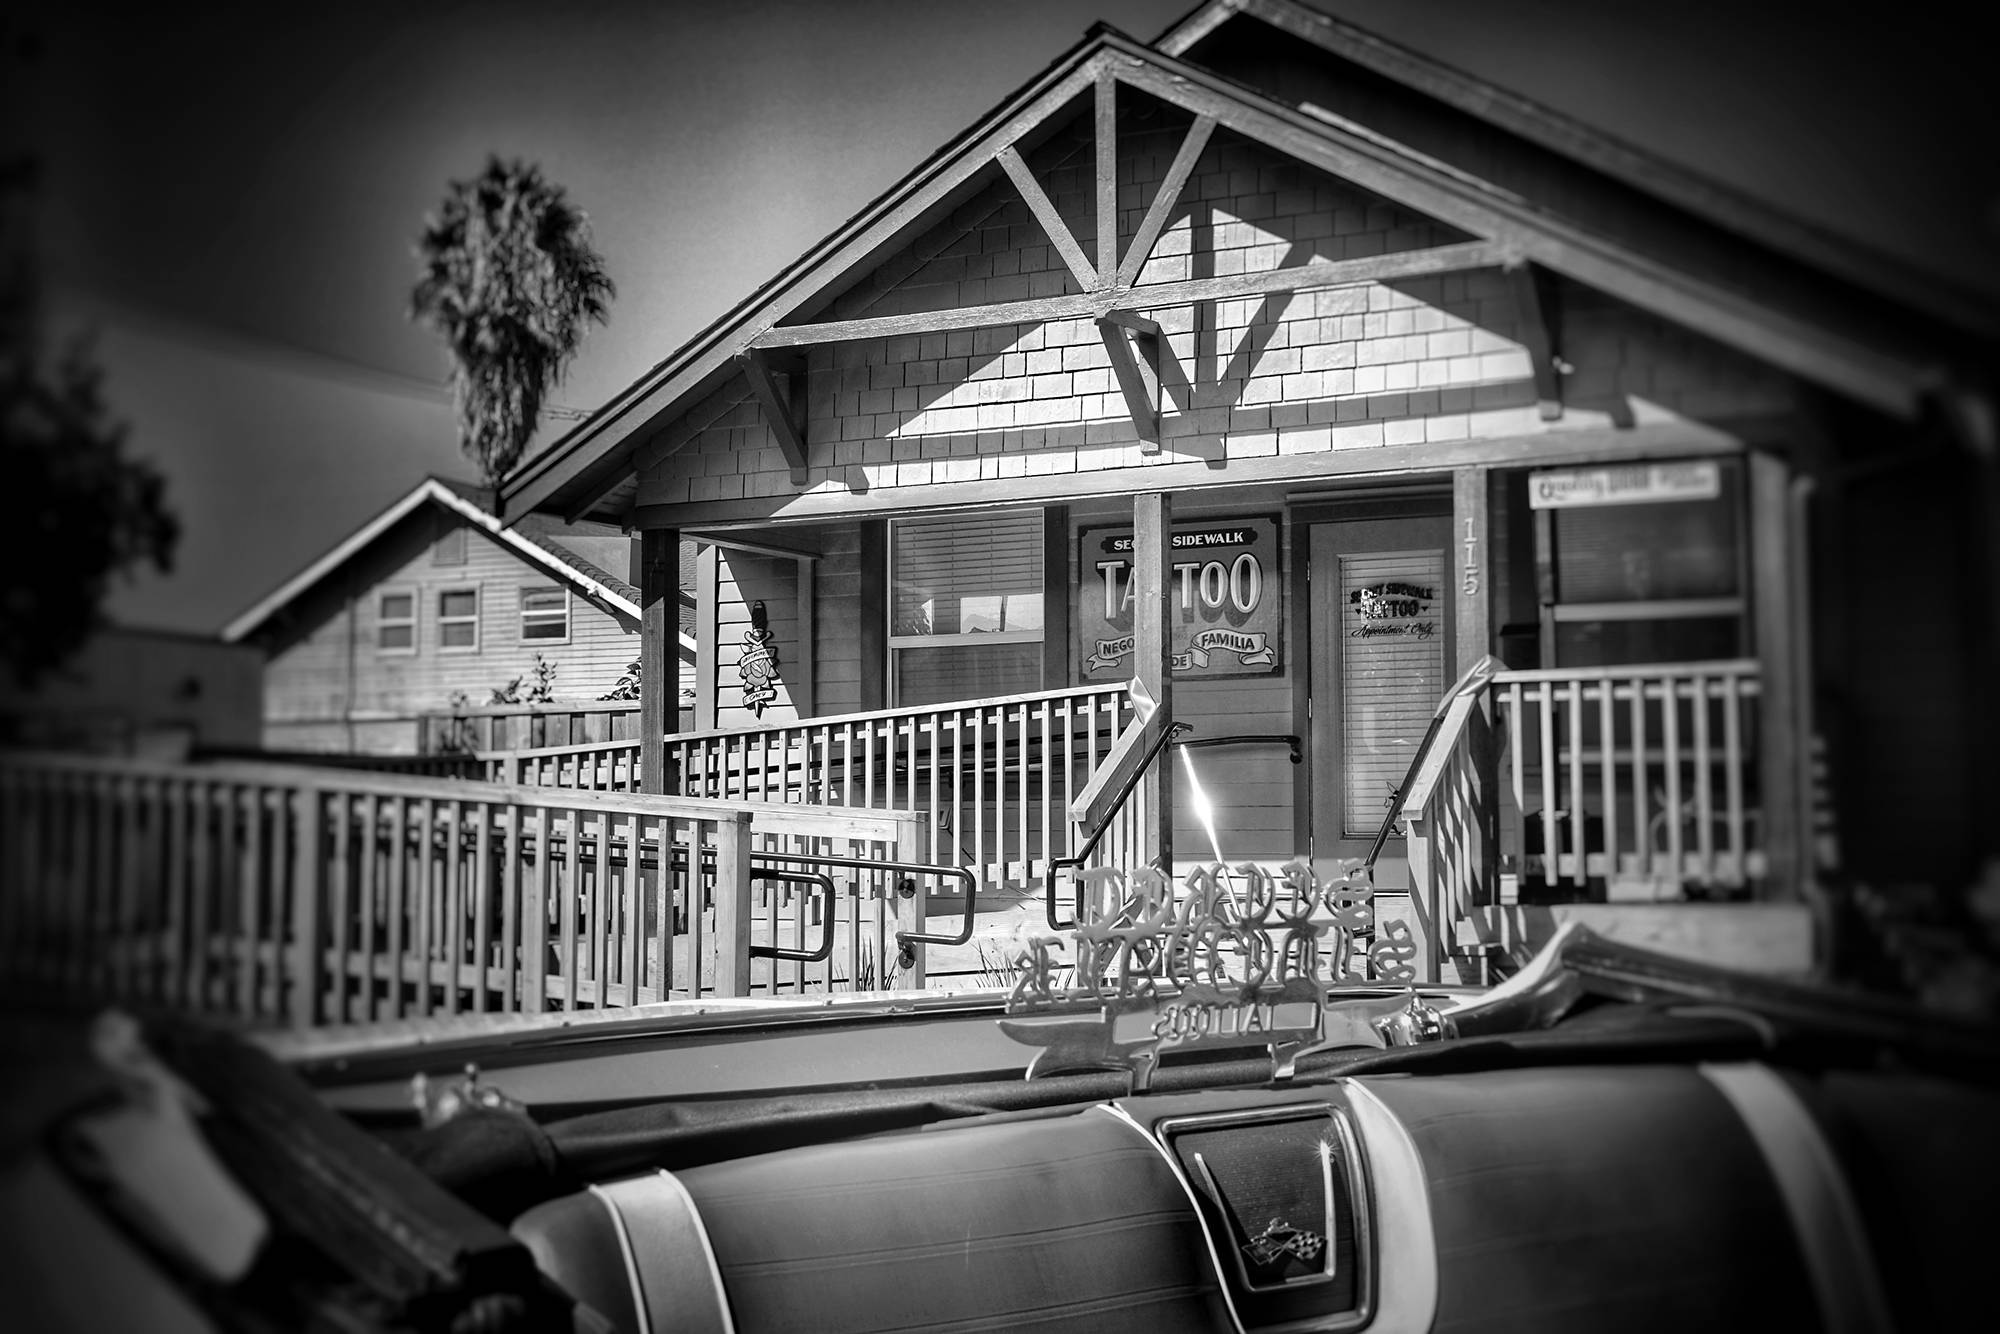 A vintage bungalow renovated for the second shop of secret sidewalk tattoos in tracy, california